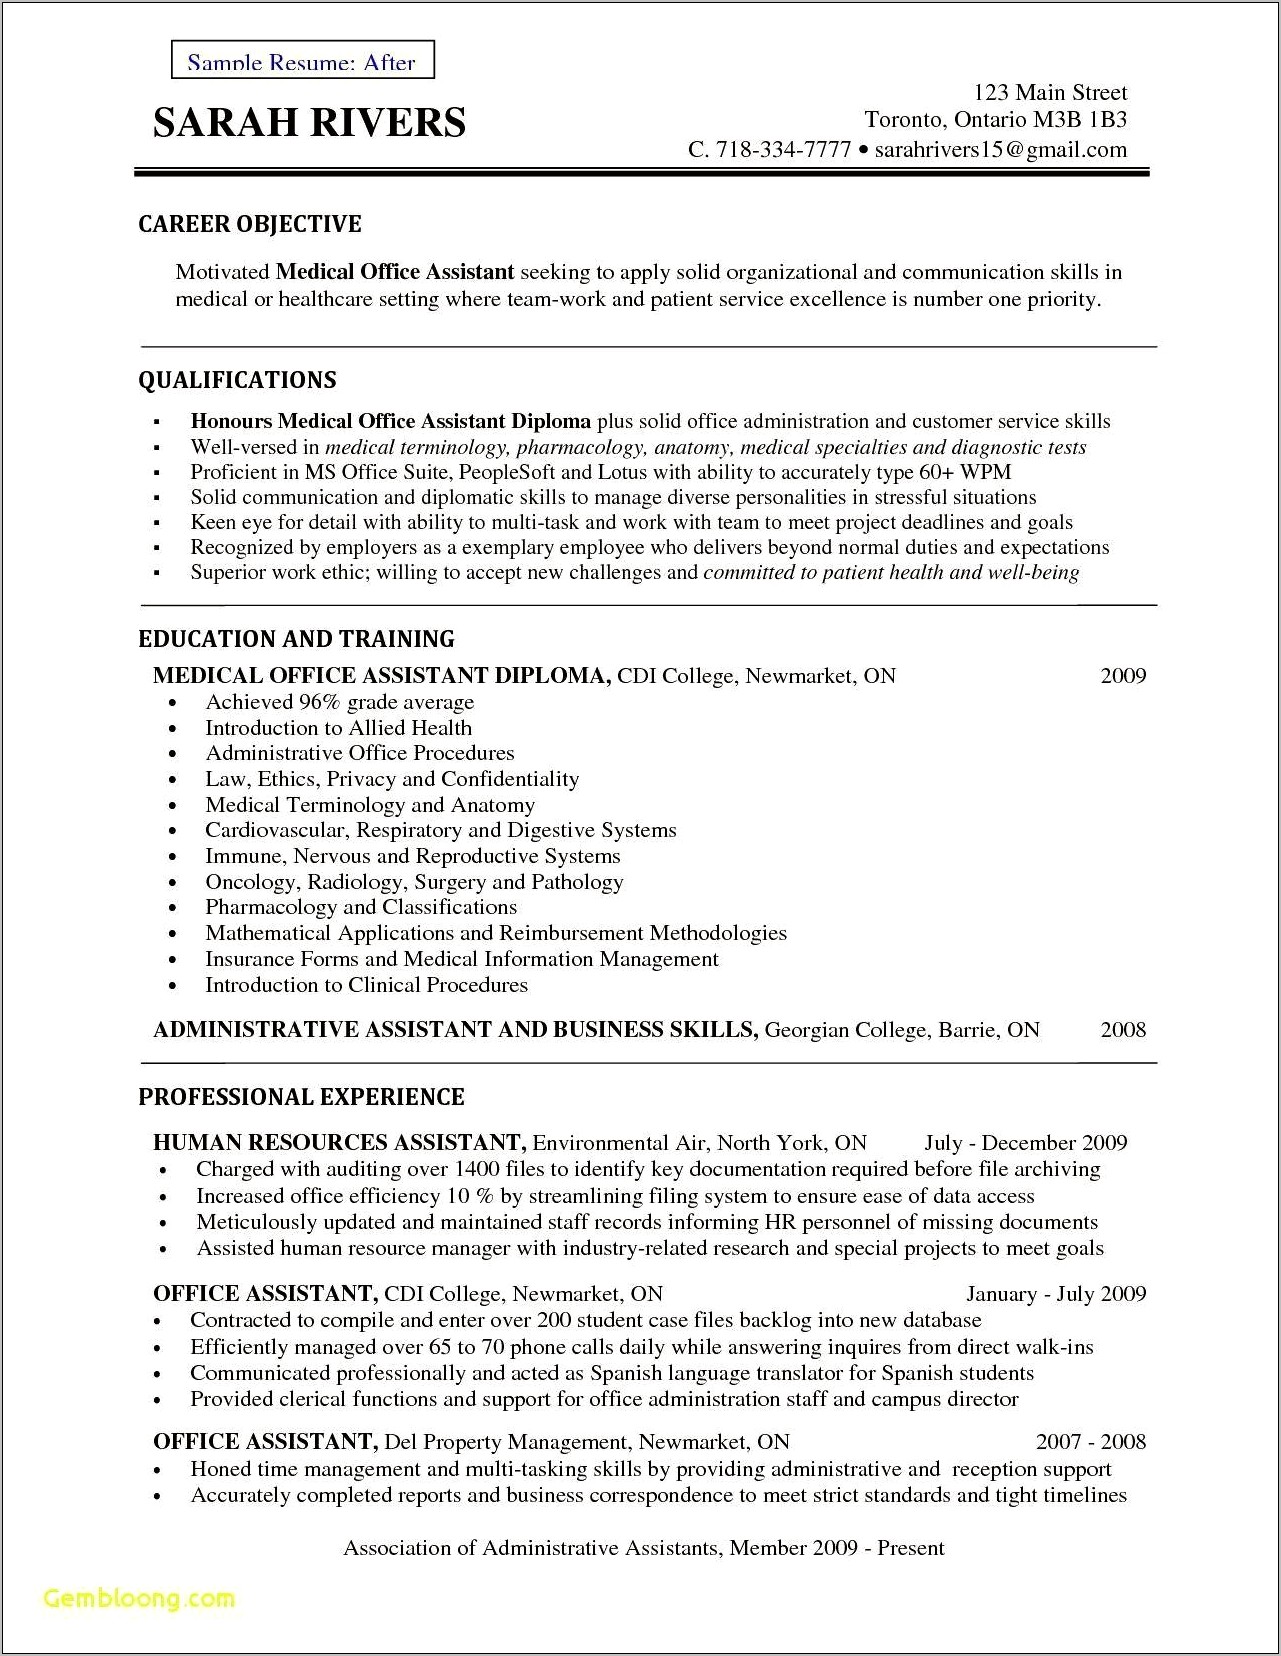 Sample Resume Of Medical Administrative Assistant